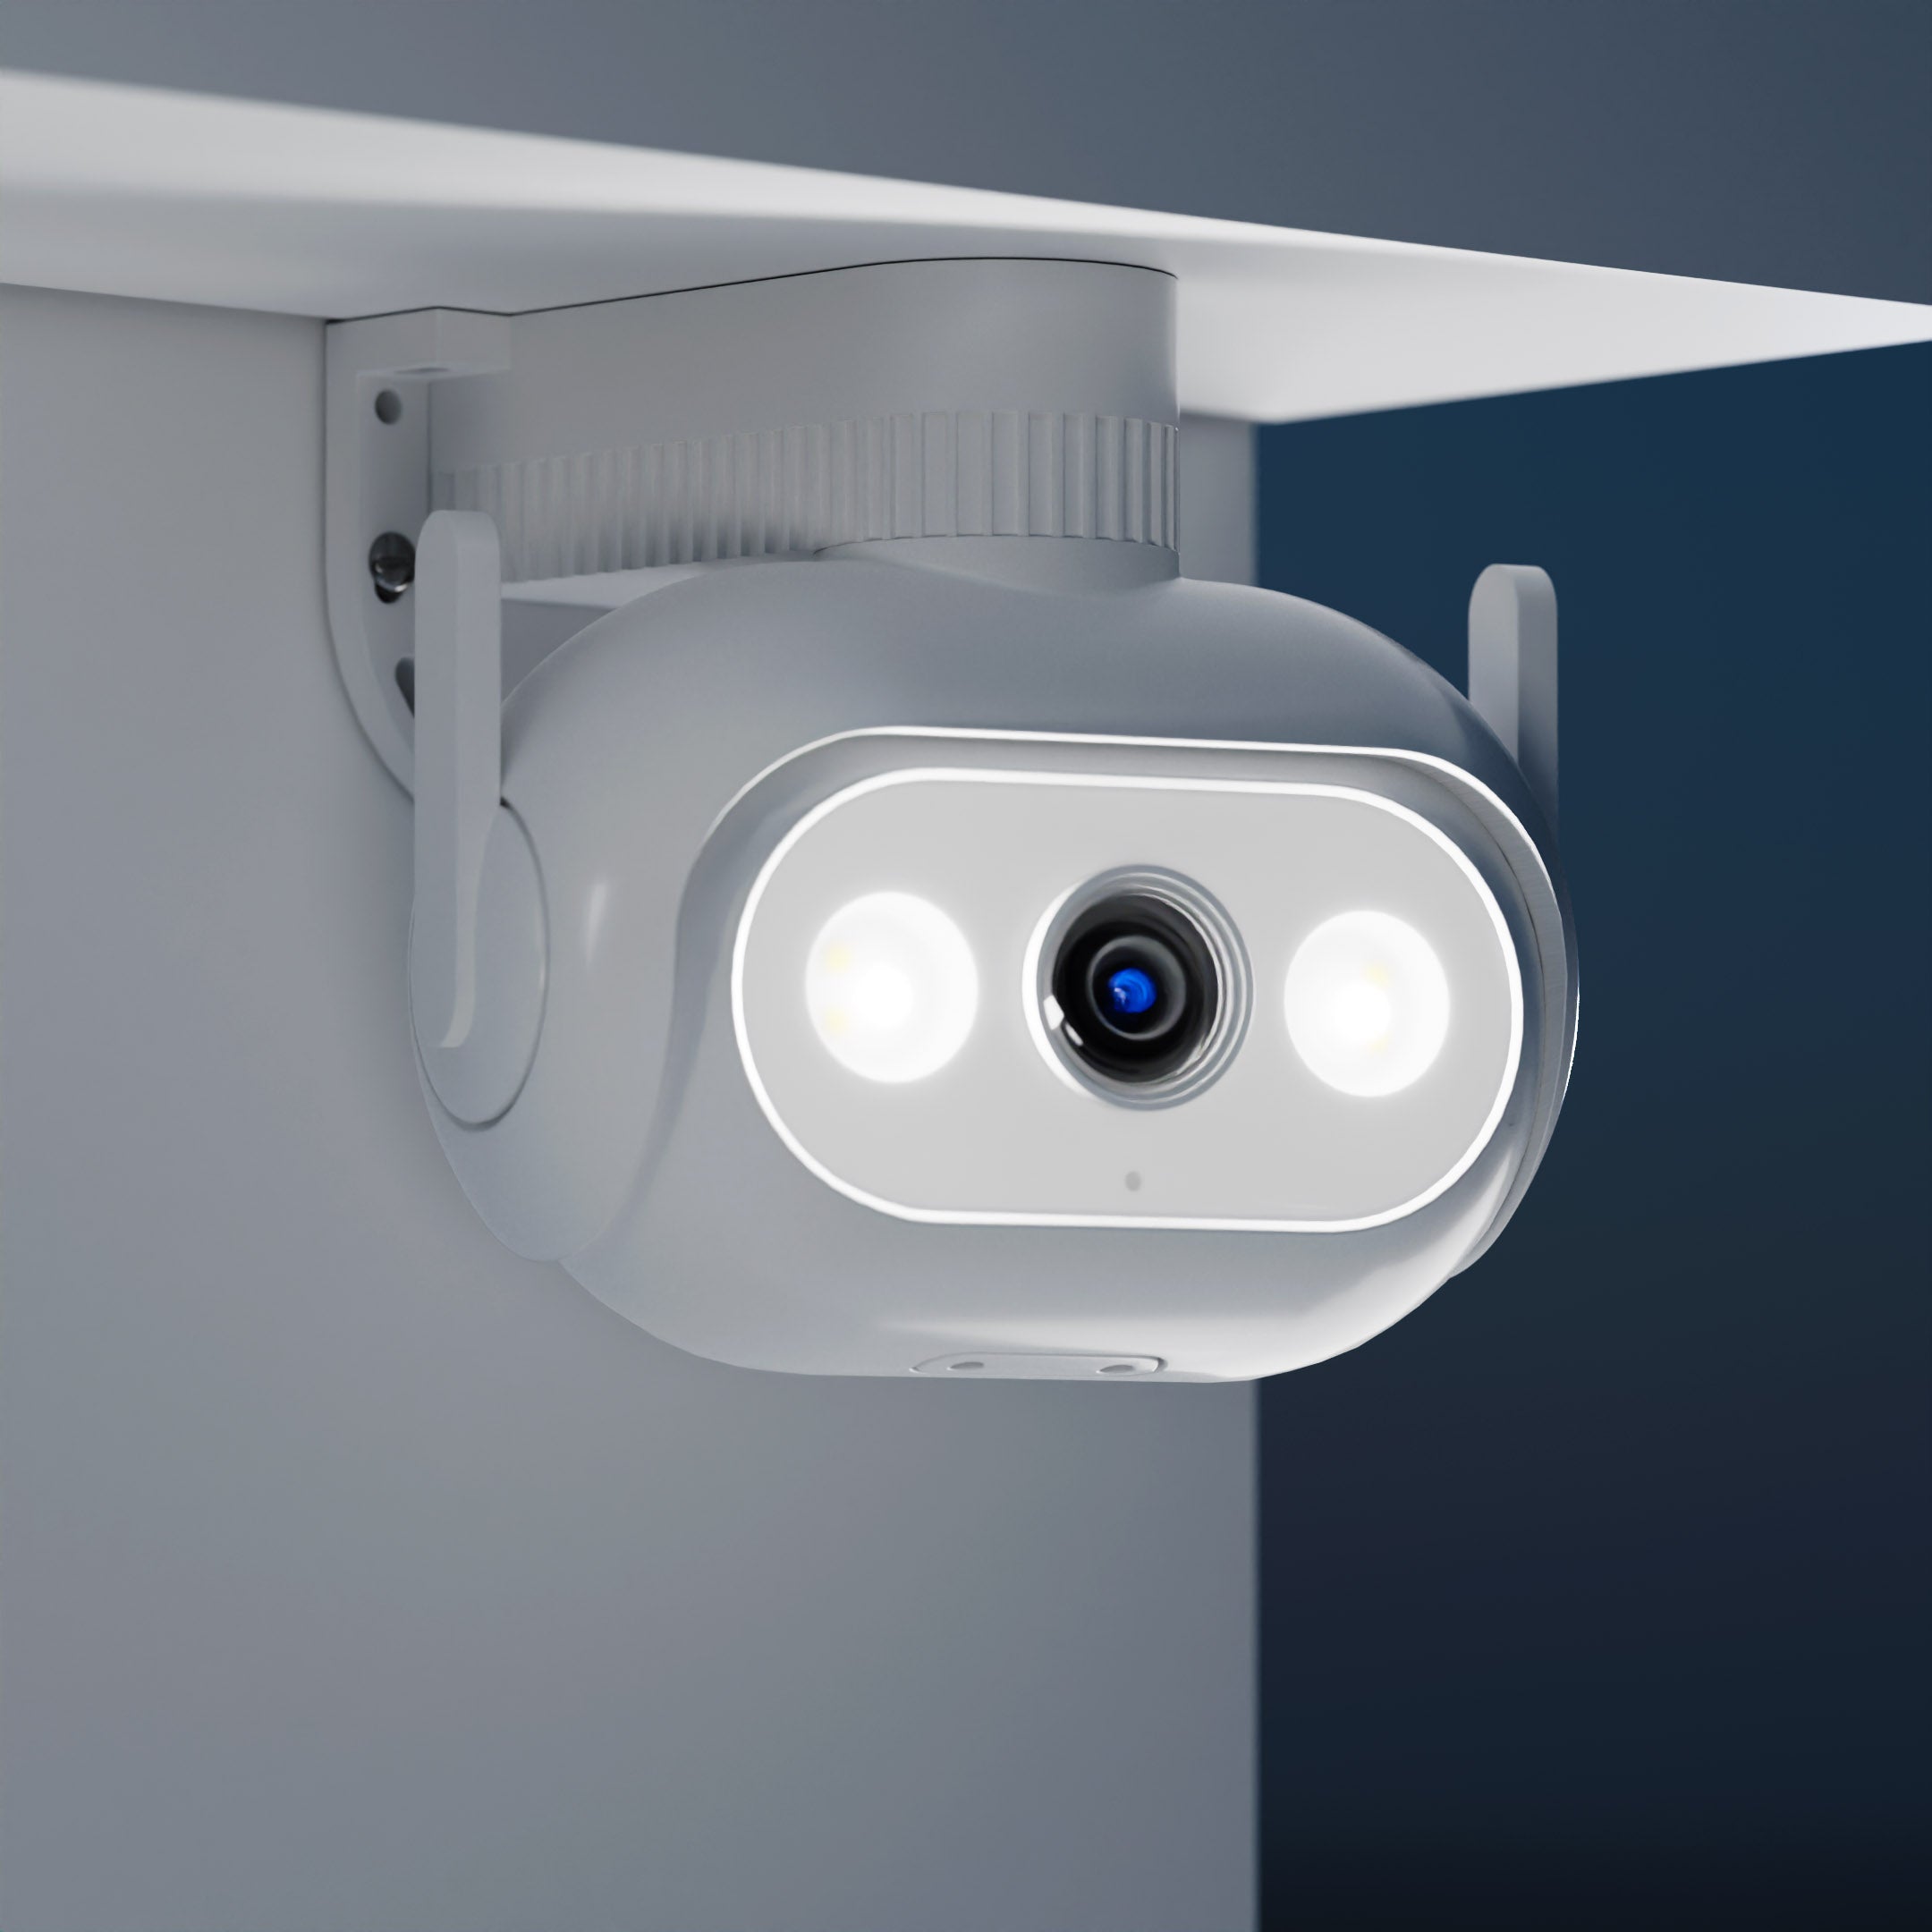 product-perspective-view-of-imilab-EC5-security-camera-hanged-on-white-wall-during-the-night